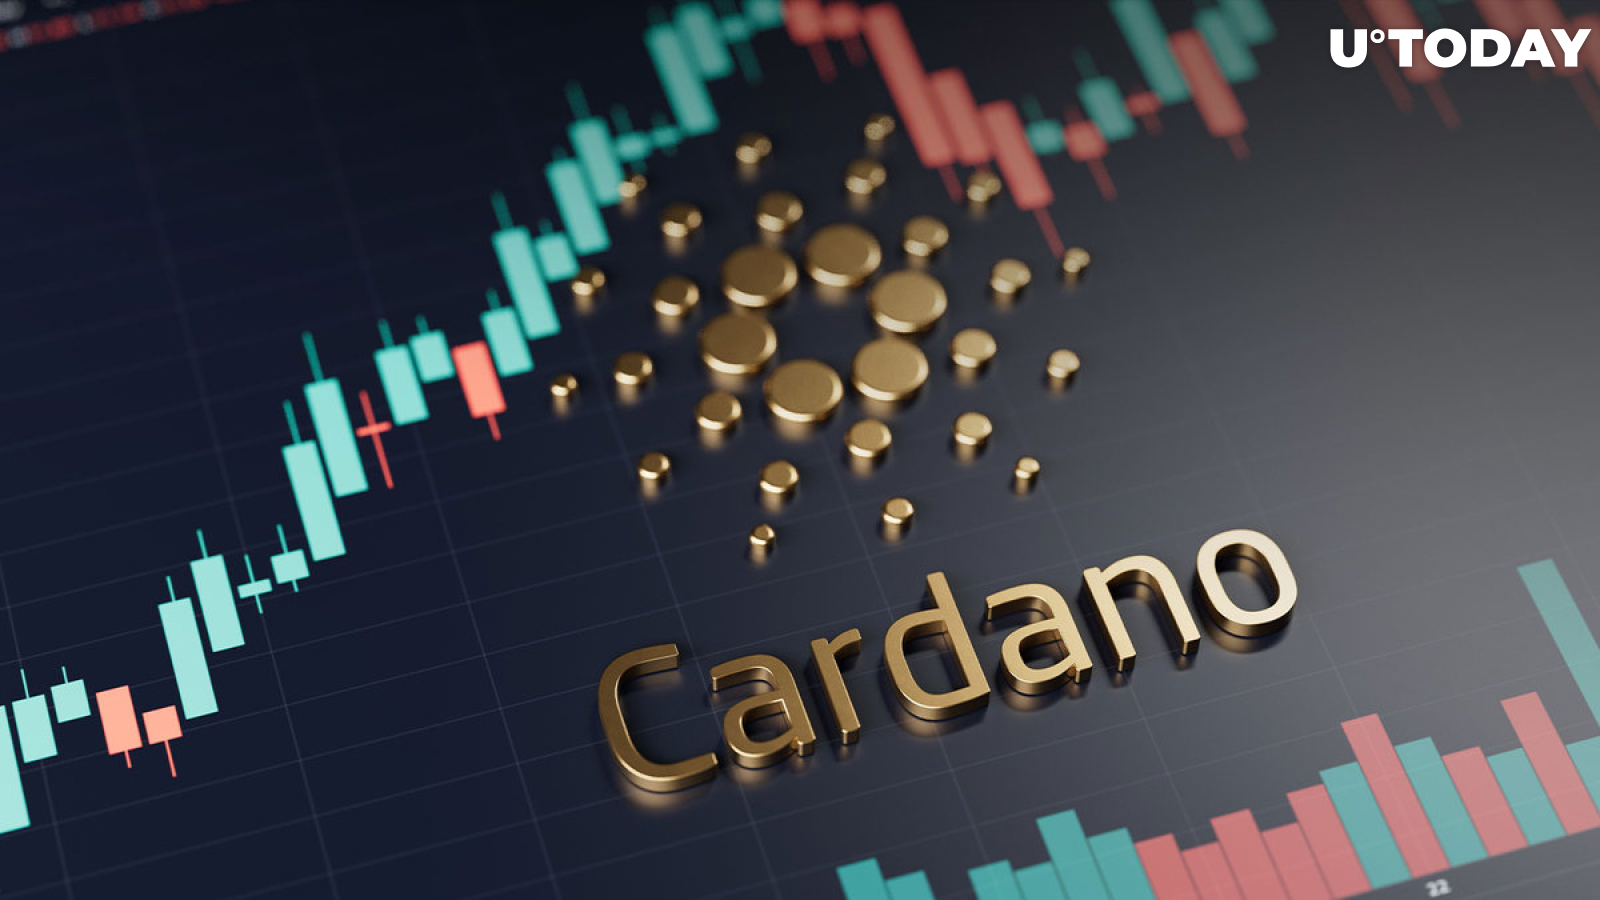 Cardano Ranks Among Top Staking Networks, Report Finds